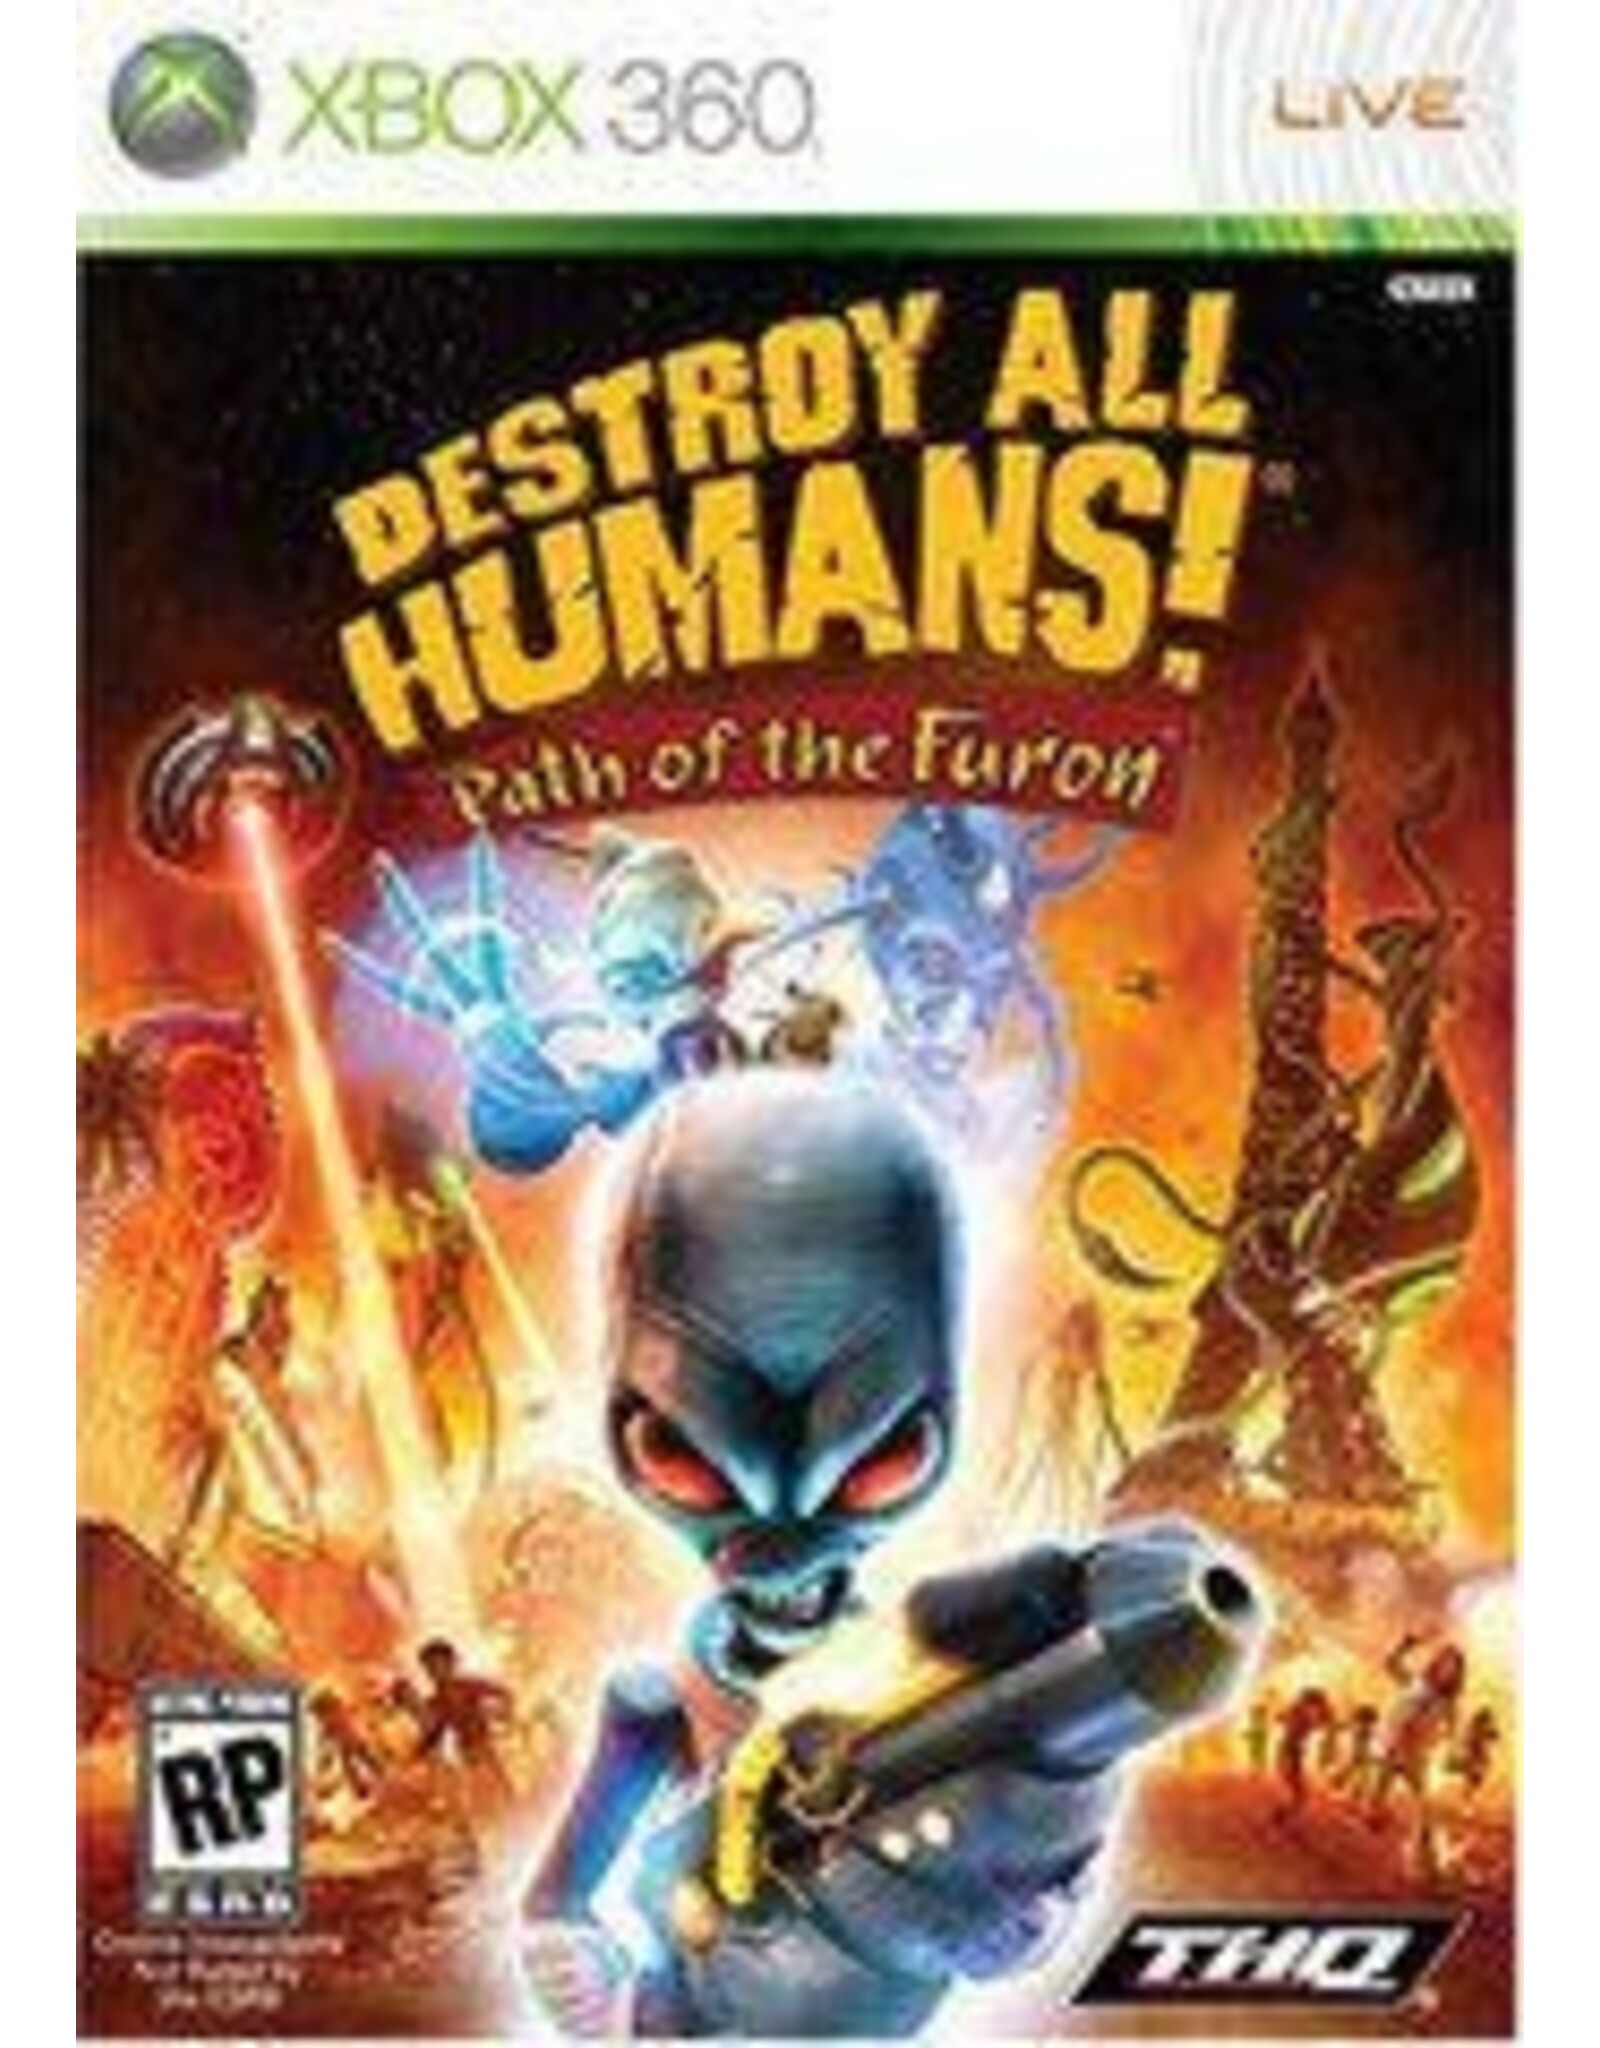 Xbox 360 Destroy All Humans: Path of the Furon (Used, No Manual, Cosmetic Damage)